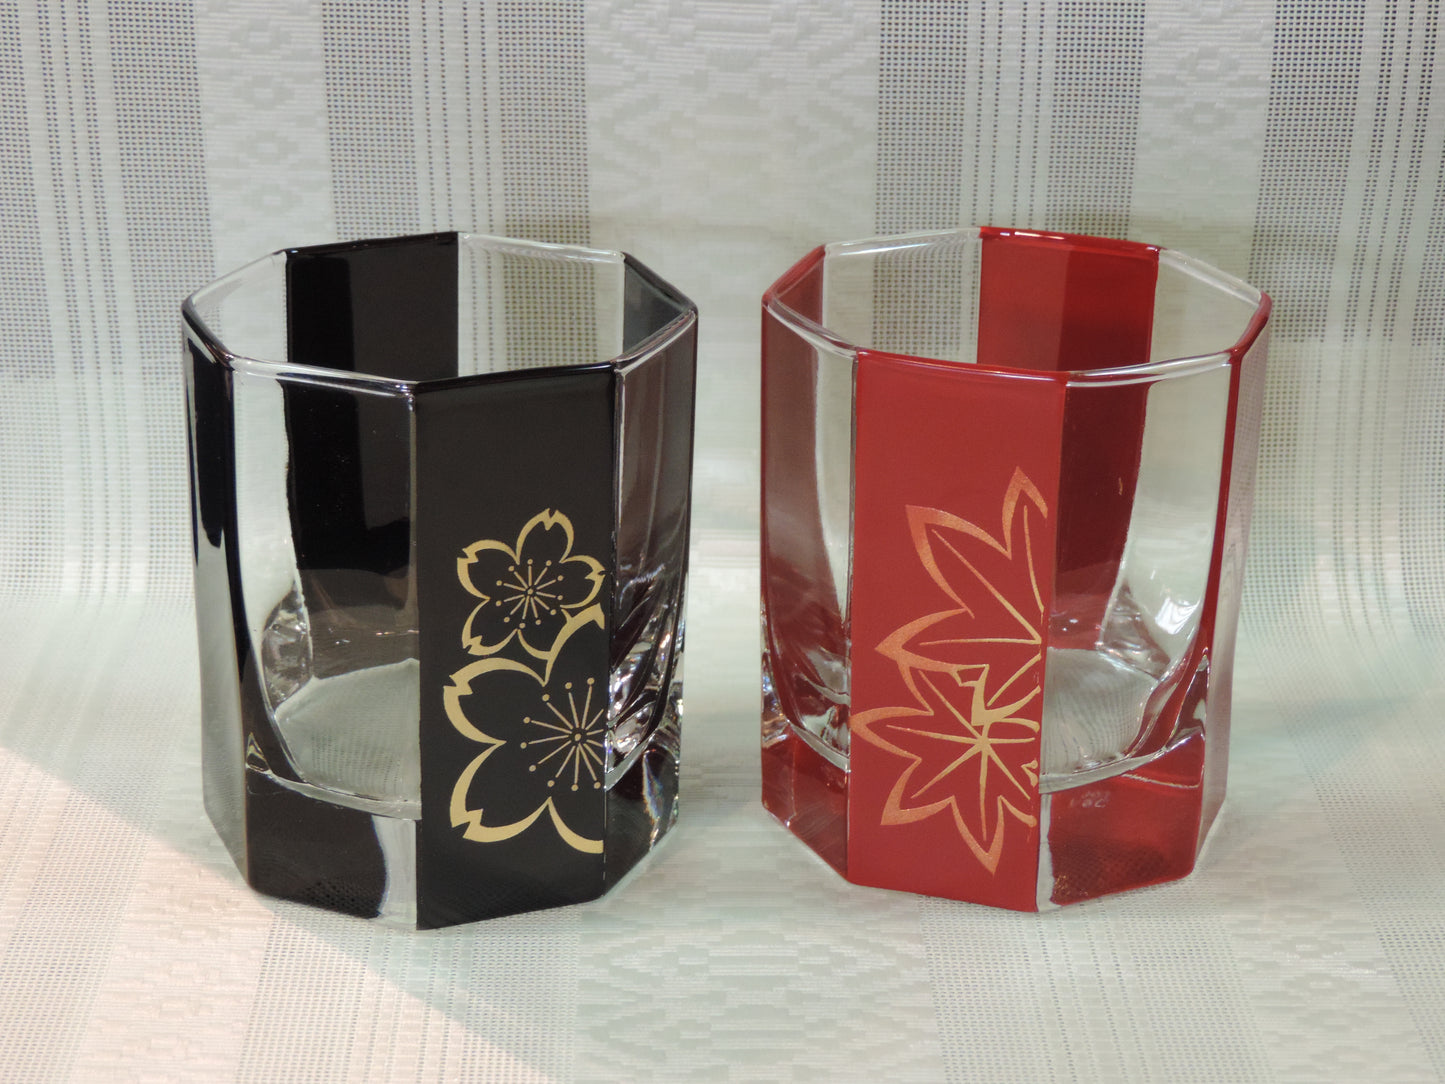 【TABLEWARE】Lacquer drinking glass